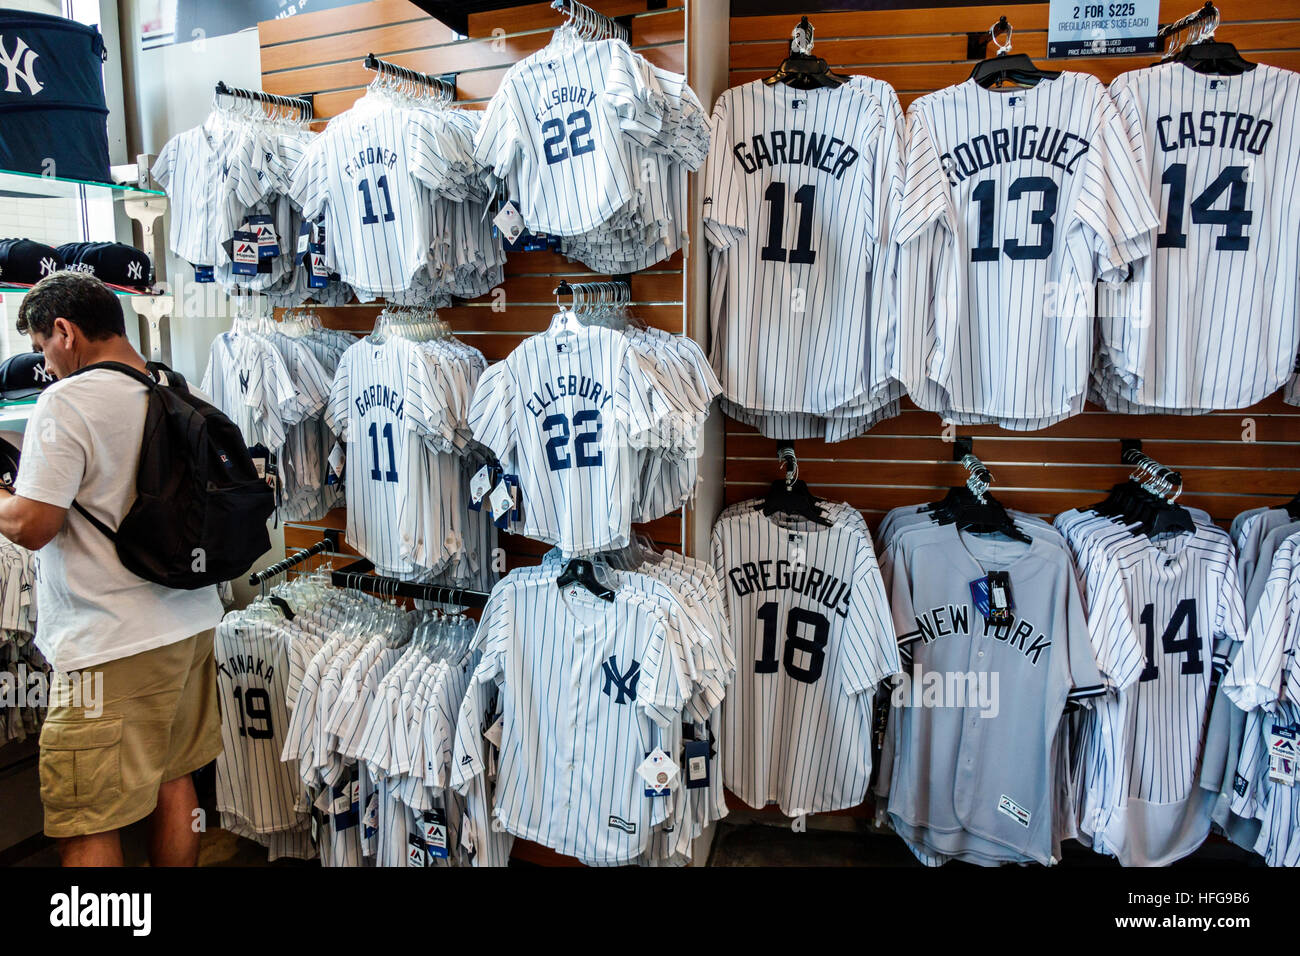 New York City,NY NYC Bronx,NY Yankees,Yankee Stadium,Ballpark,shopping shopper shoppers magasins marché marchés achats vente, magasin St Banque D'Images